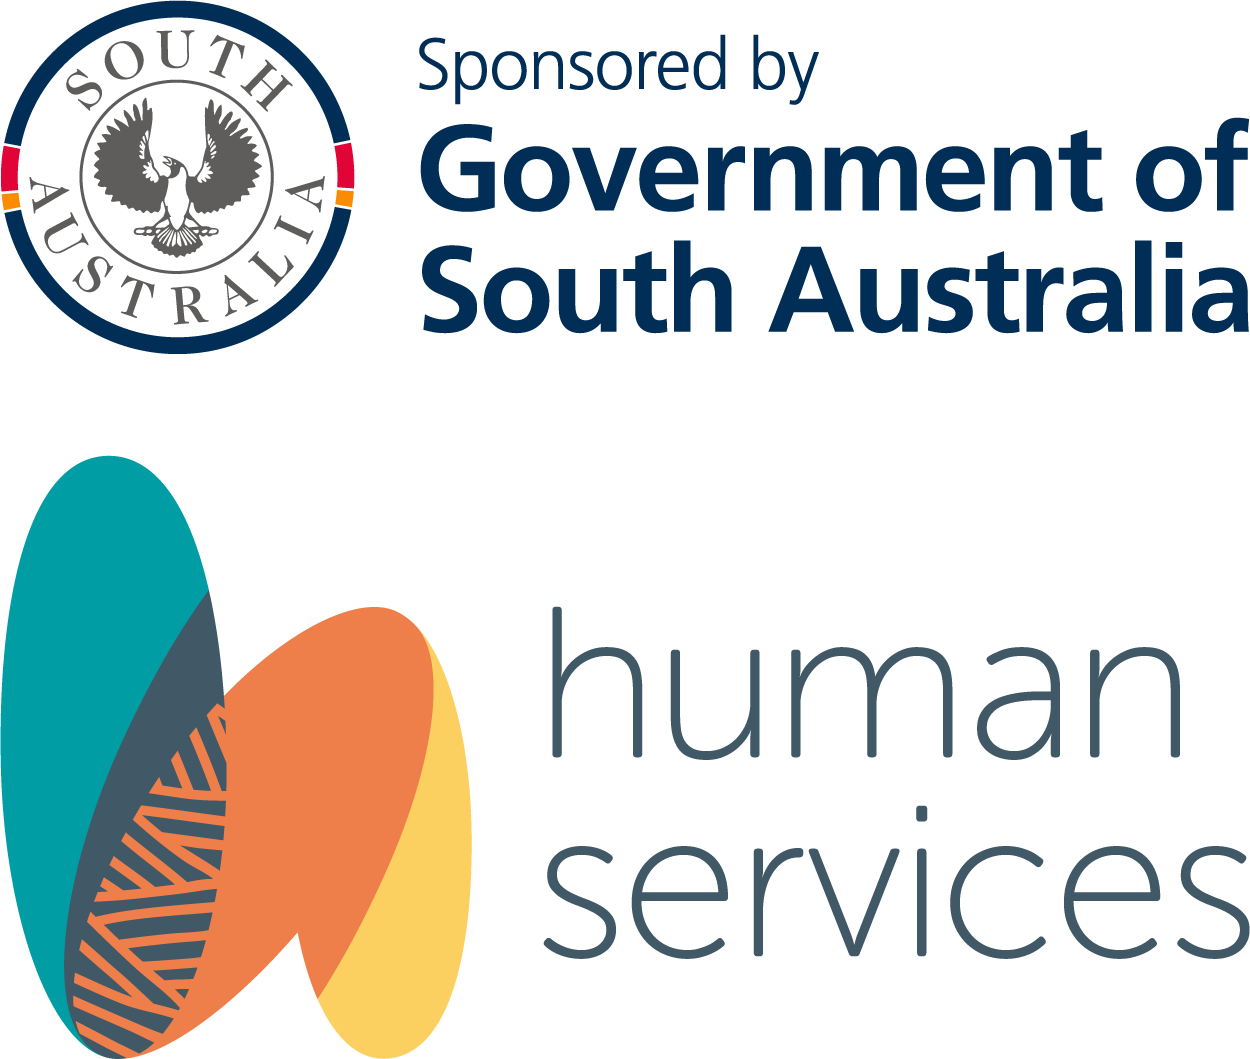 Department of Human Services logo